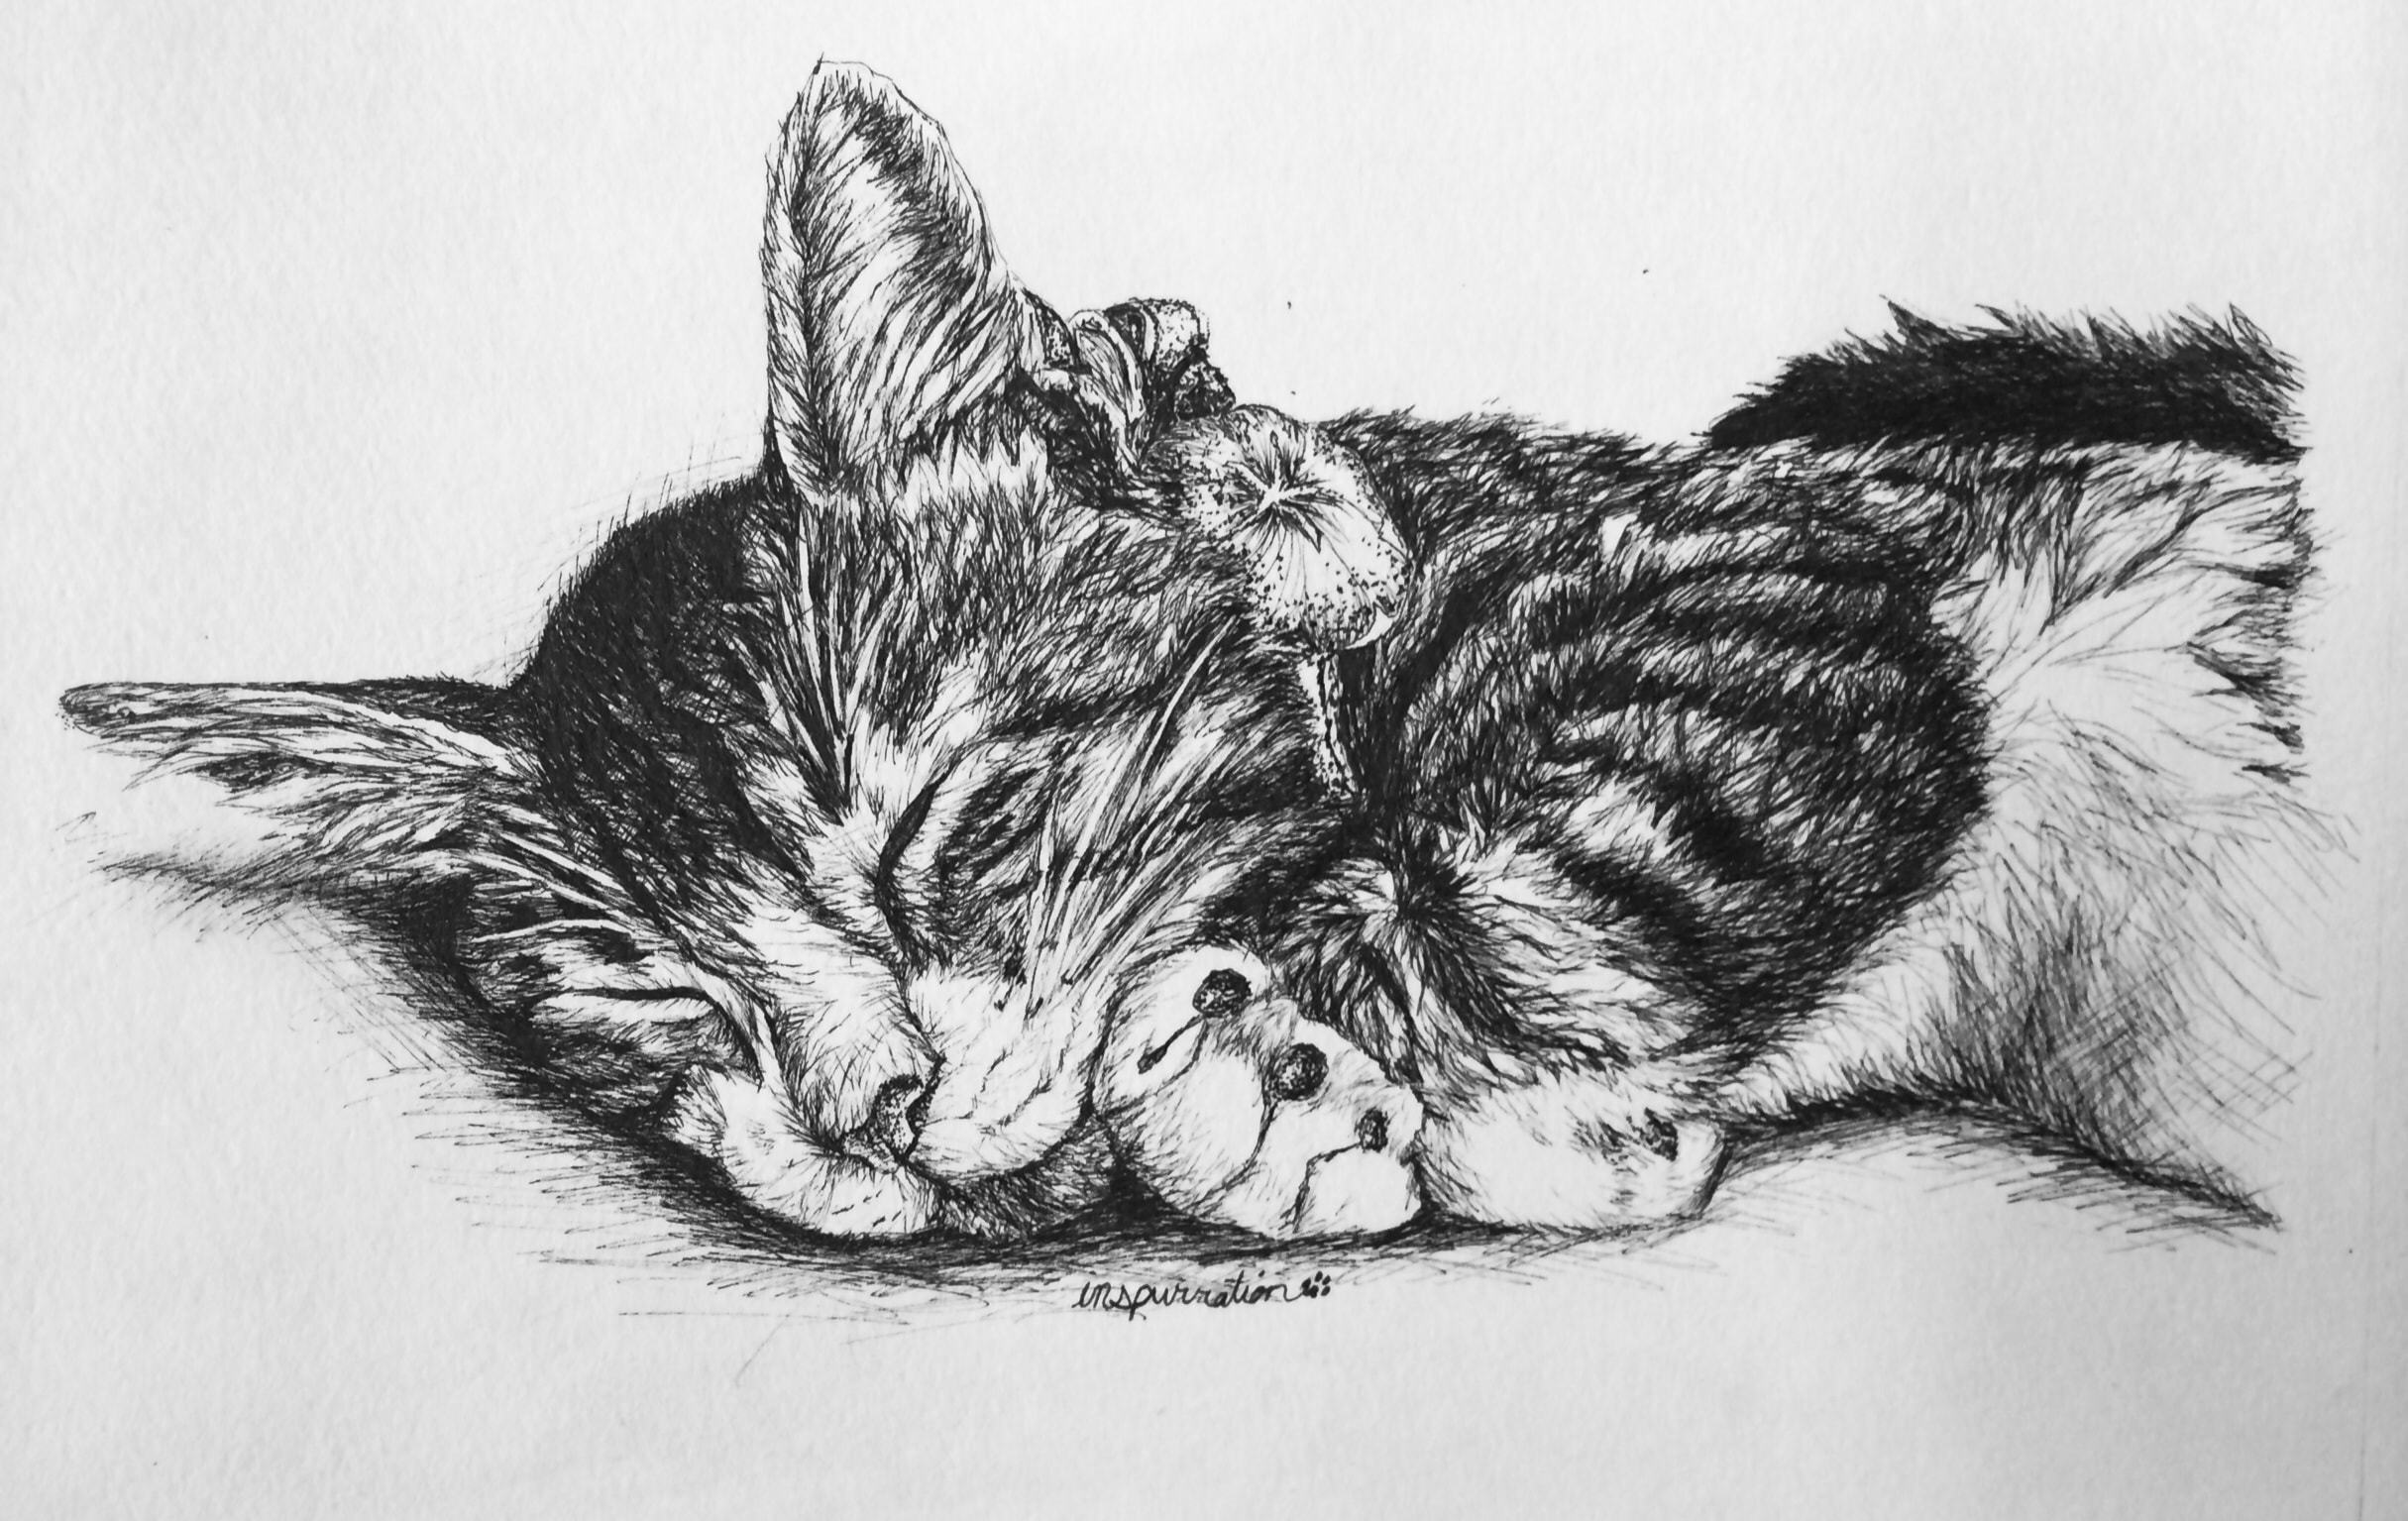 Custom Pen and Ink Cat Drawings by Inspurration - The Conscious Cat